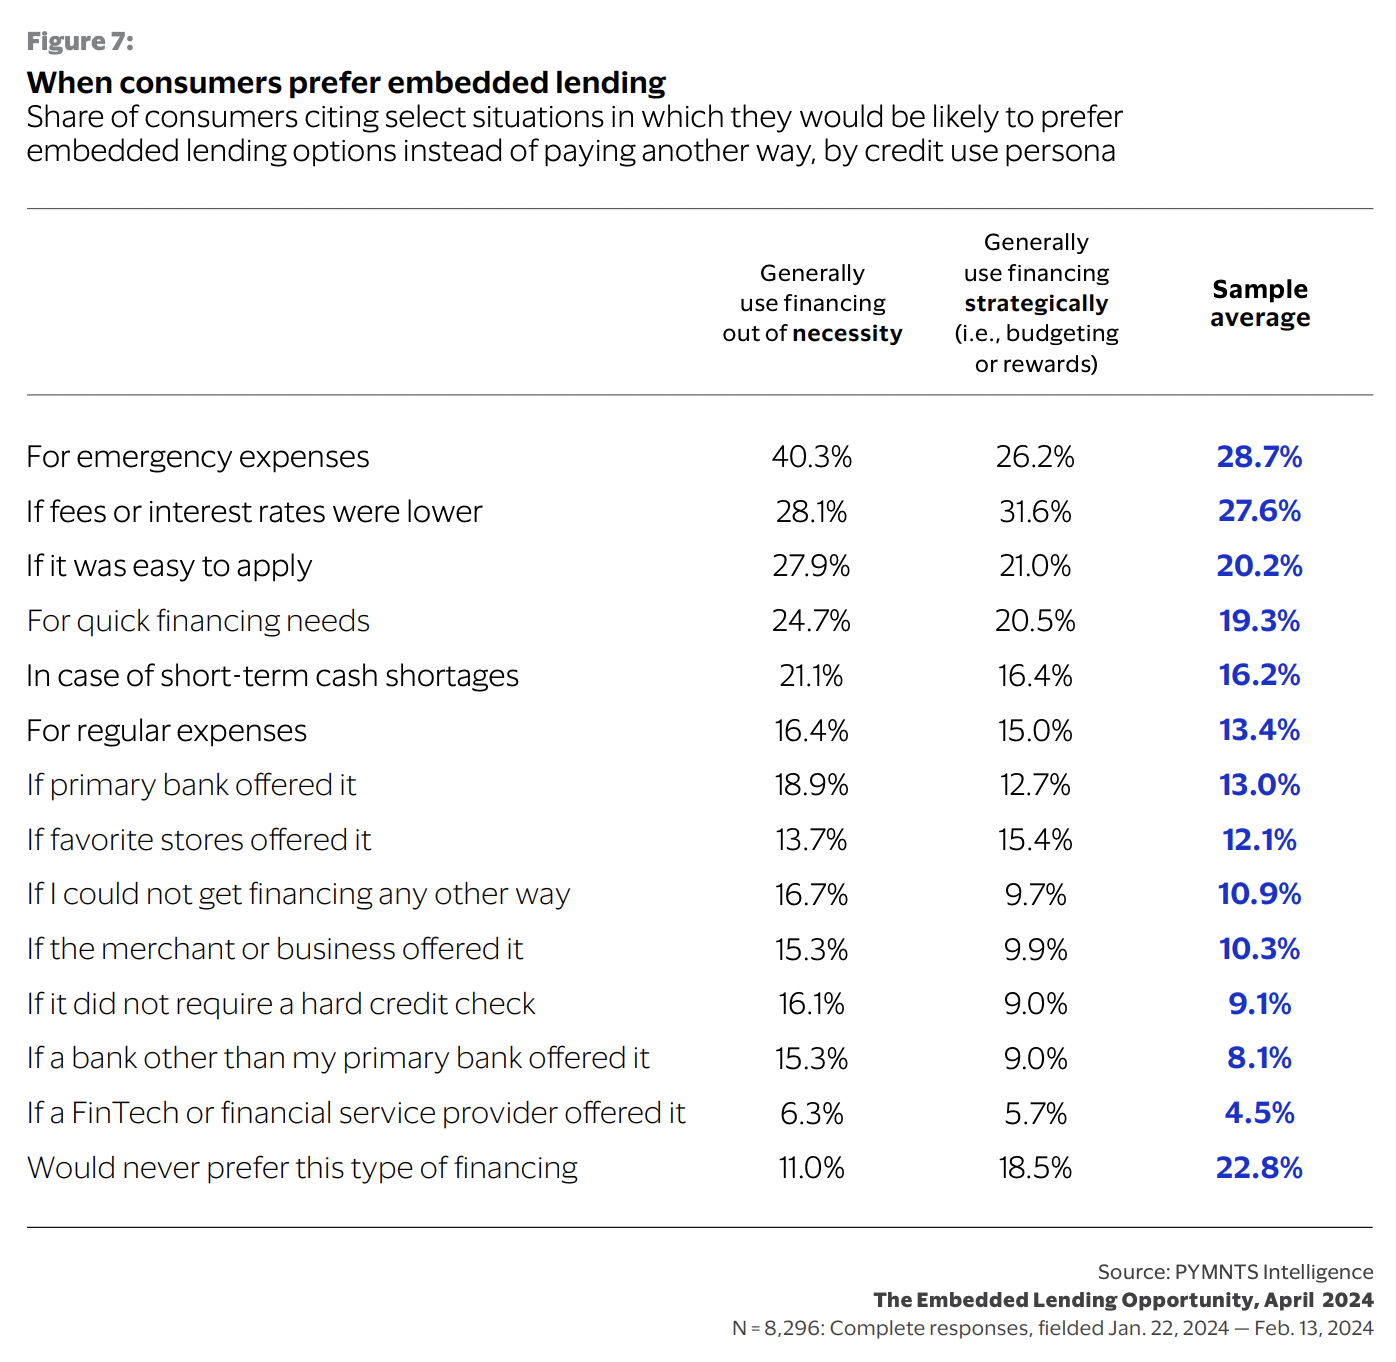 12% of Shoppers Would Use Embedded Lending at Favorite Stores if Offered